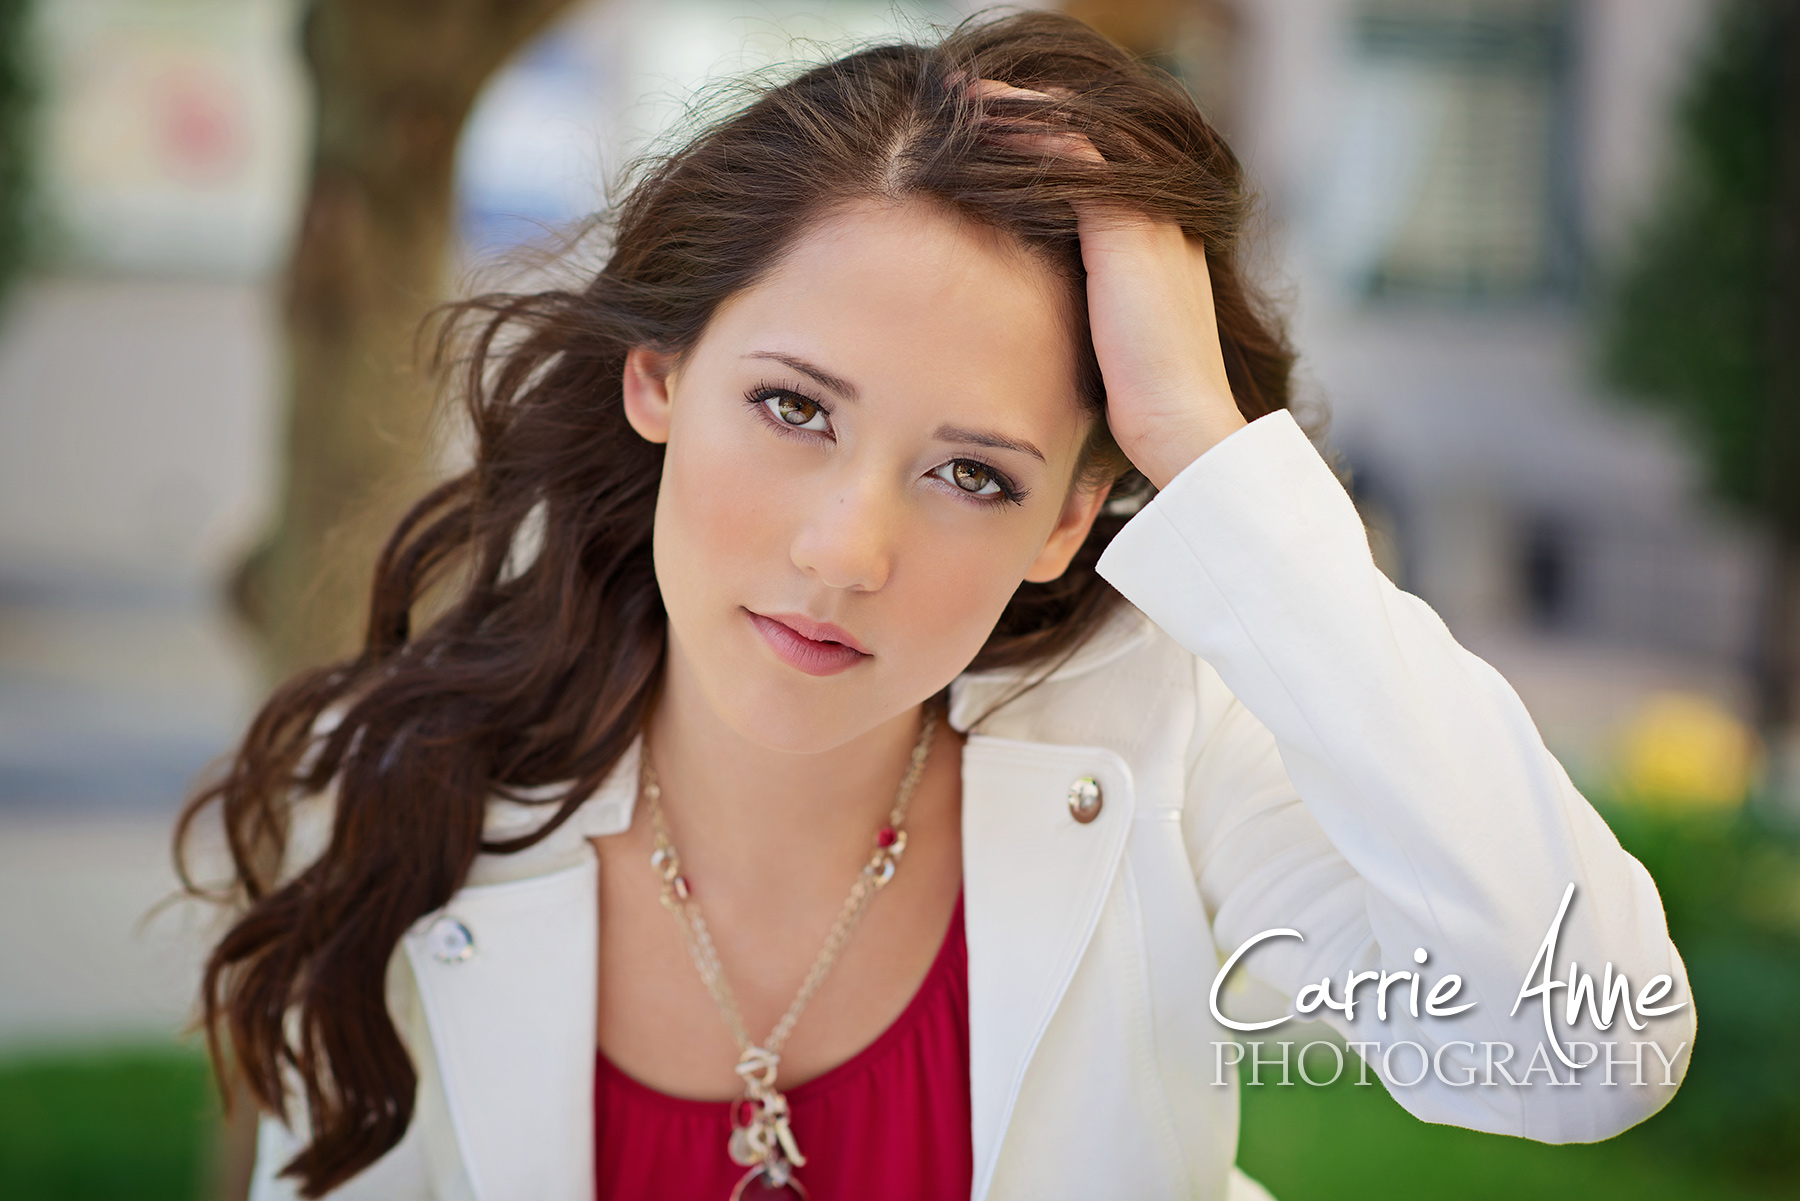 Best West Michigan Senior Pictures : Carrie Anne Photography